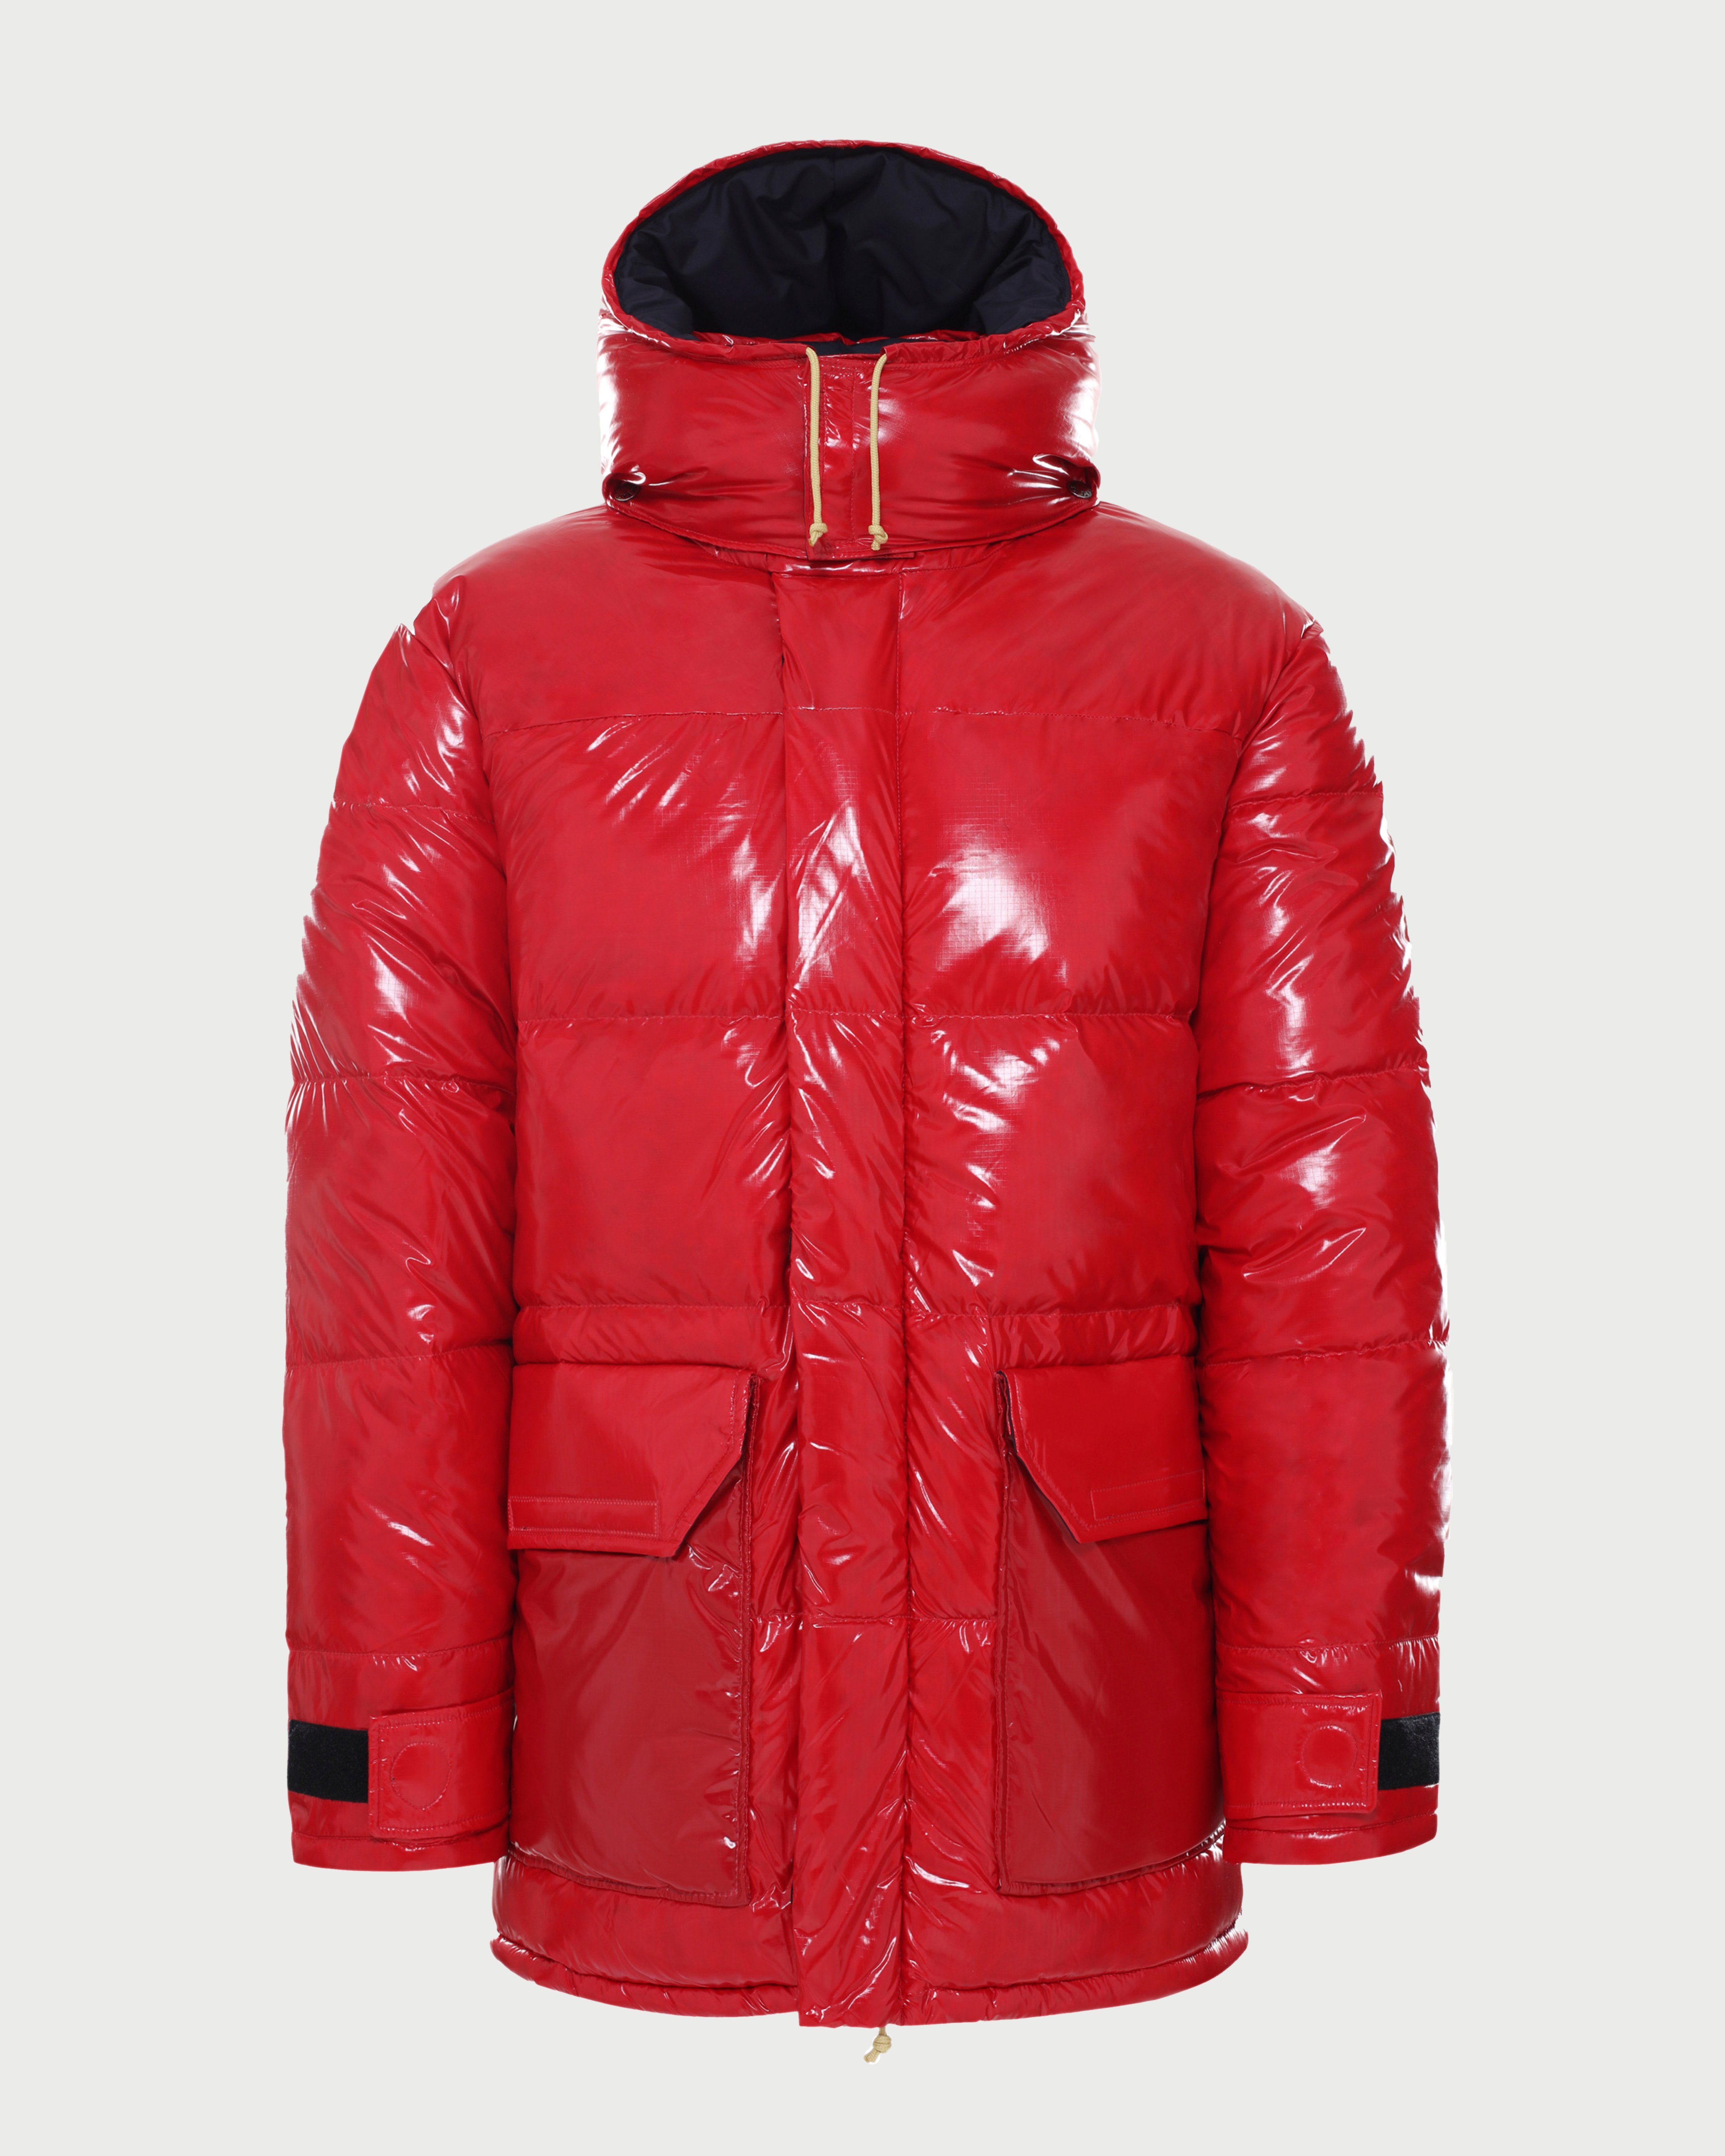 The North Face - Brown Label Brown Label Ripstop Down Parka Red Unisex - Clothing - Red - Image 1